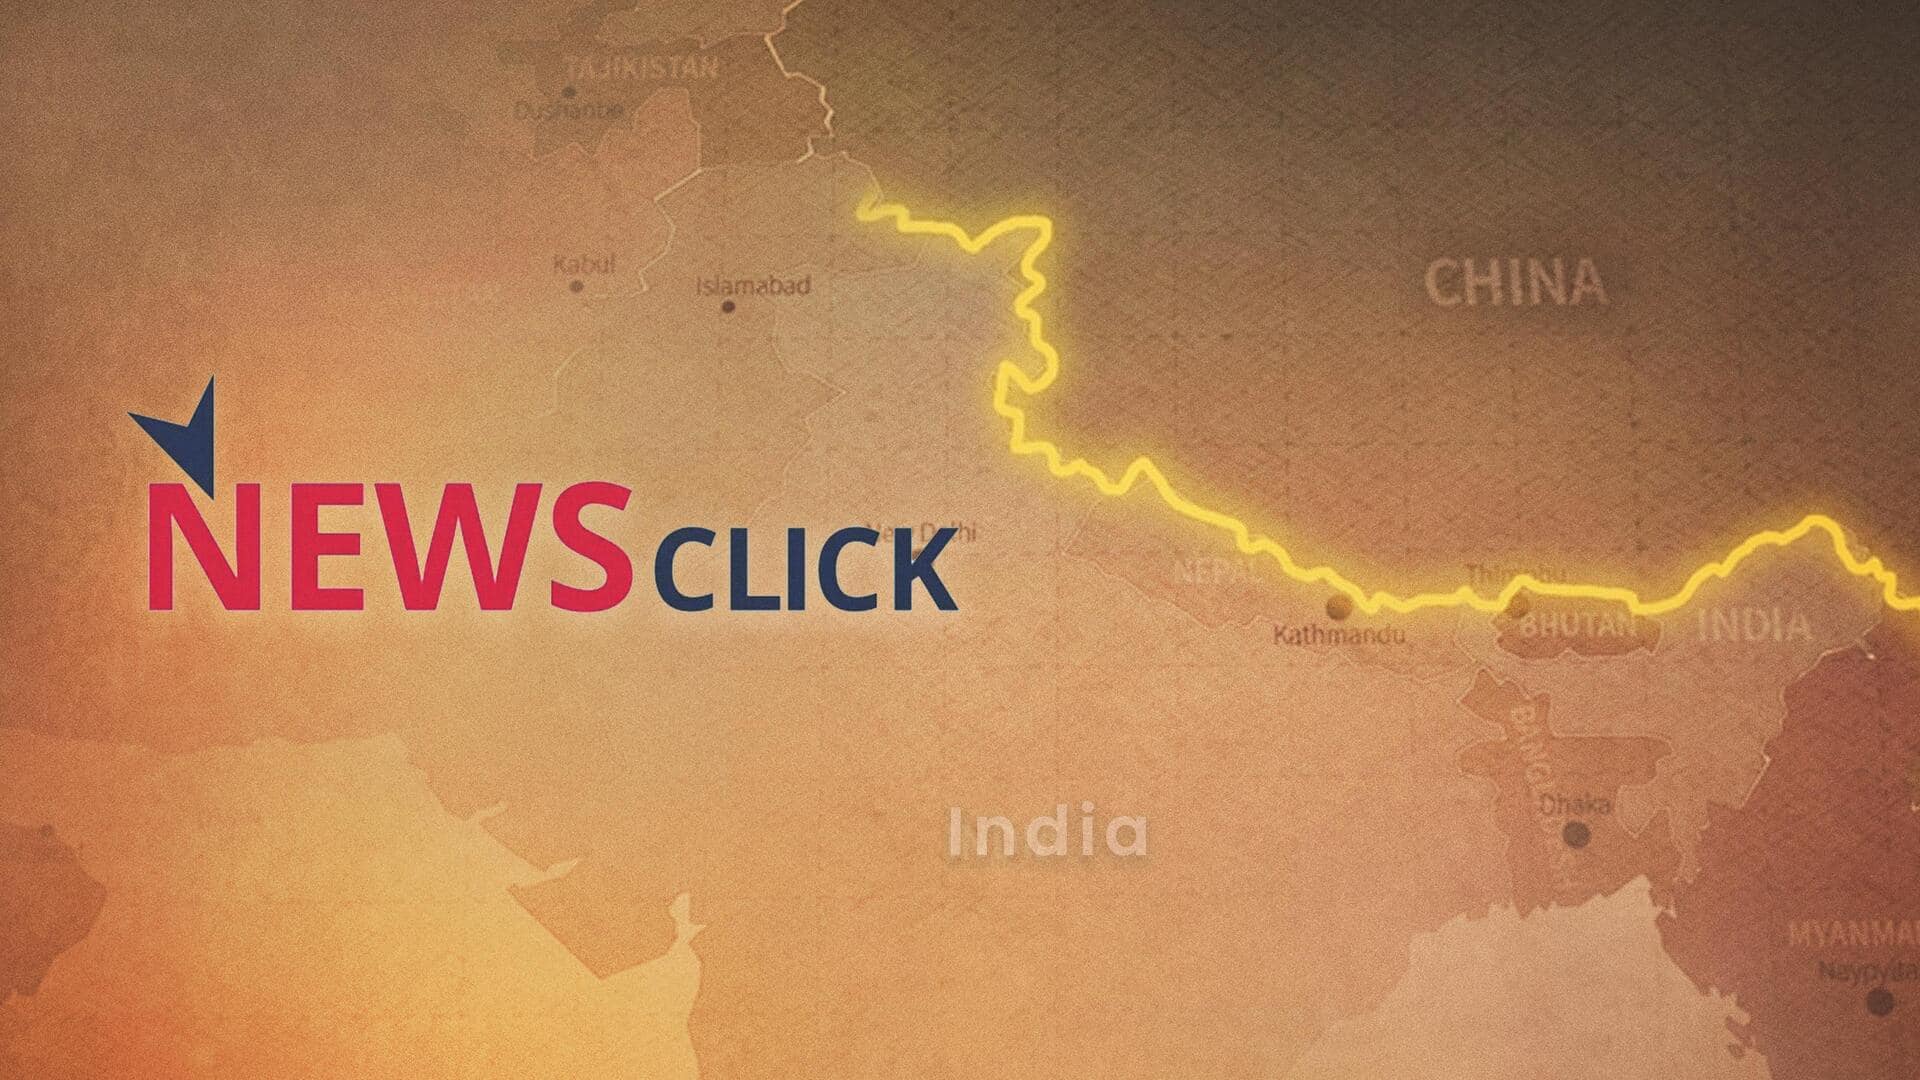 NewsClick allegedly distorted India's map, showing Arunachal, Kashmir as disputed